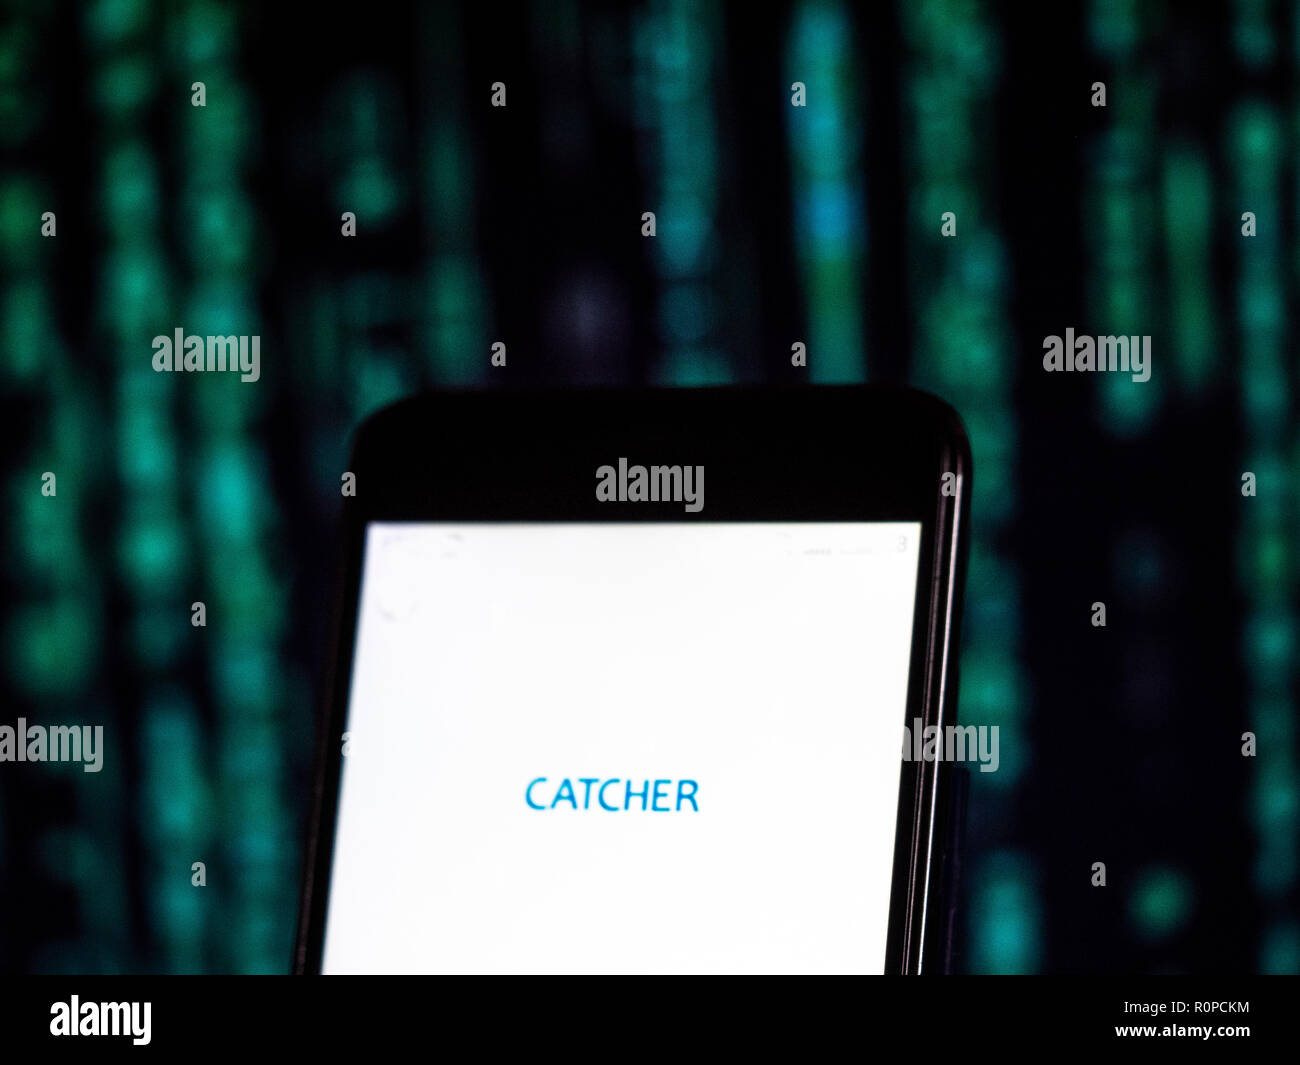 Catcher Technology Co. Ltd. logo seen displayed on smart phone. Catcher Technology is a manufacturer of computer and communication electronics Stock Photo